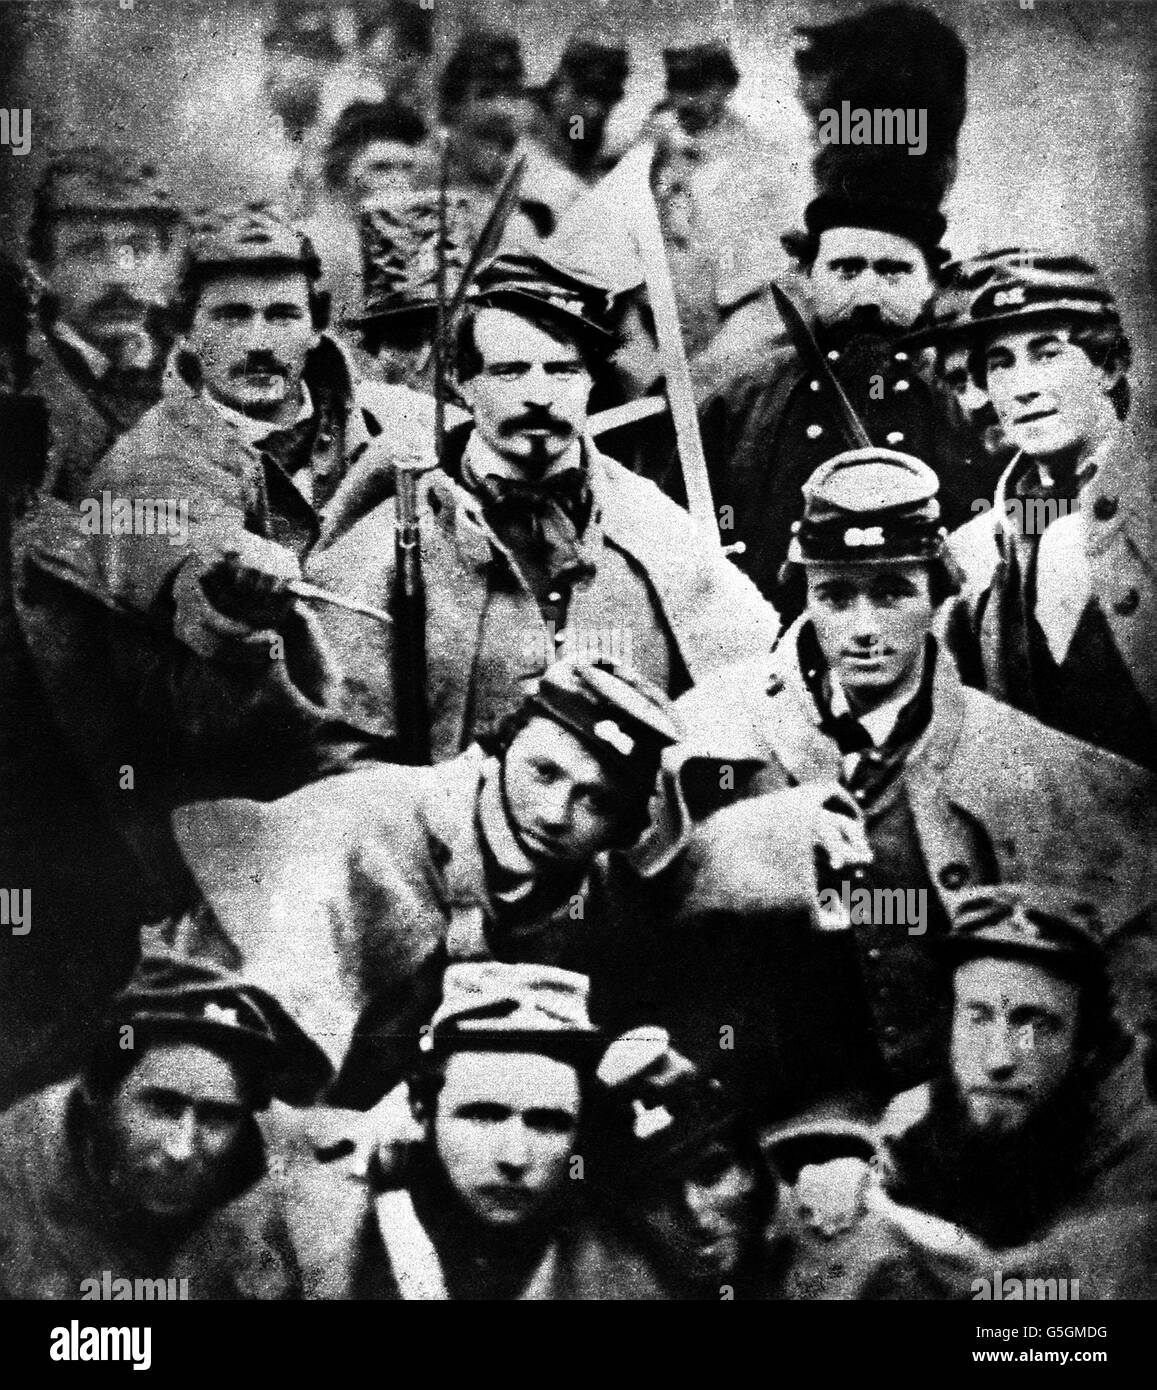 1863 : Confederate soldiers pose for the camera in the early days of the American Civil War between the Southern States and the Unionist North. Stock Photo